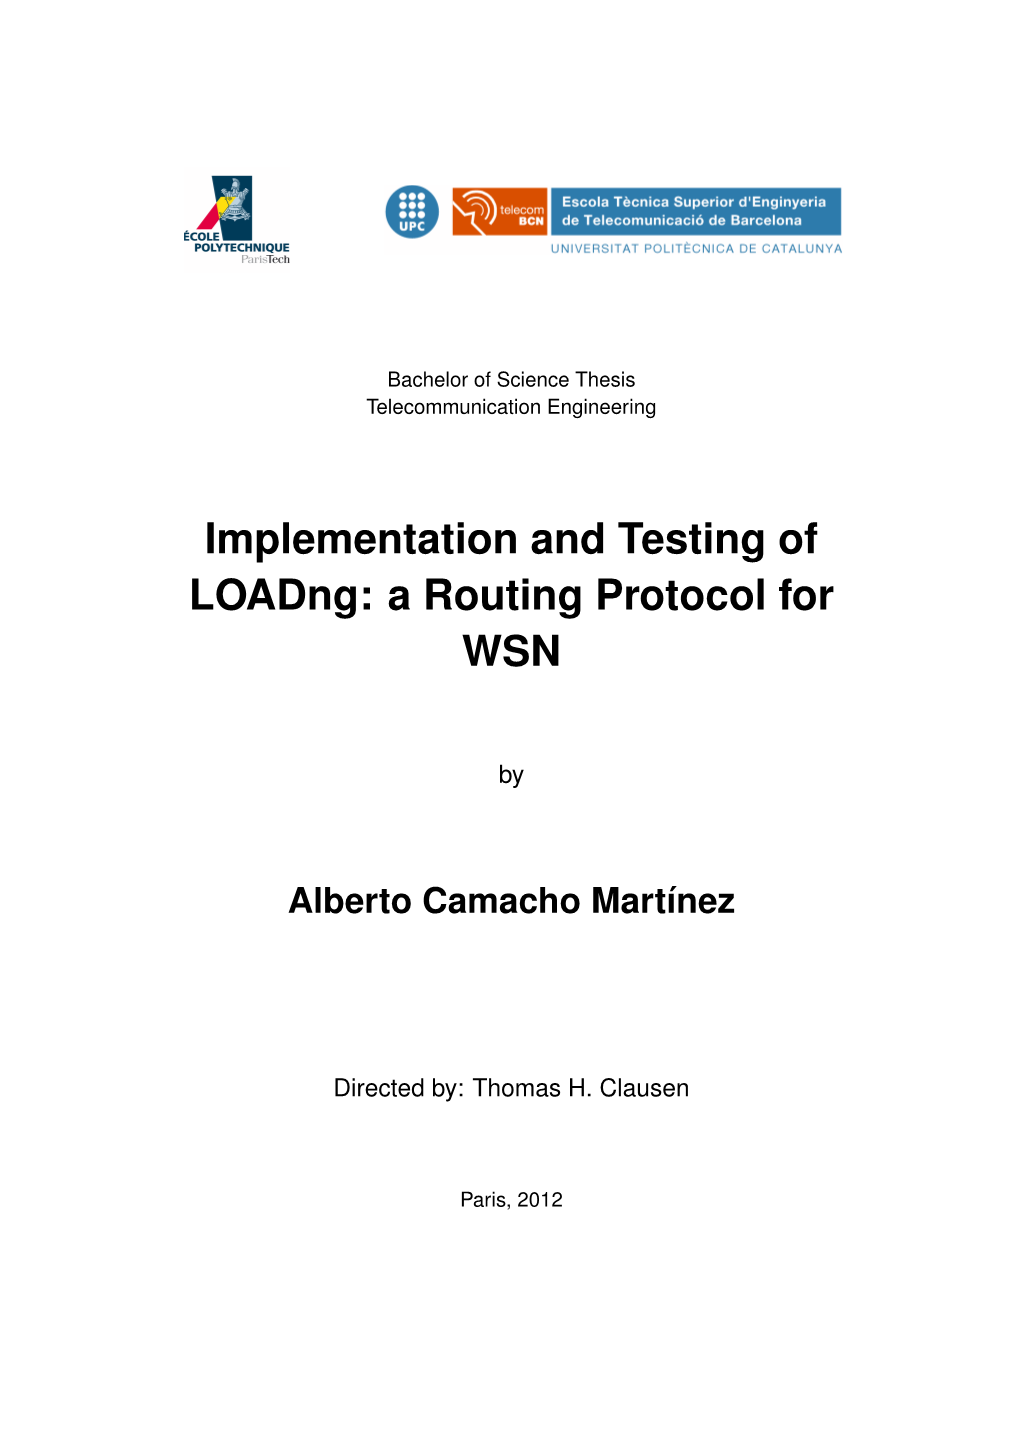 Implementation and Testing of Loadng: a Routing Protocol for WSN